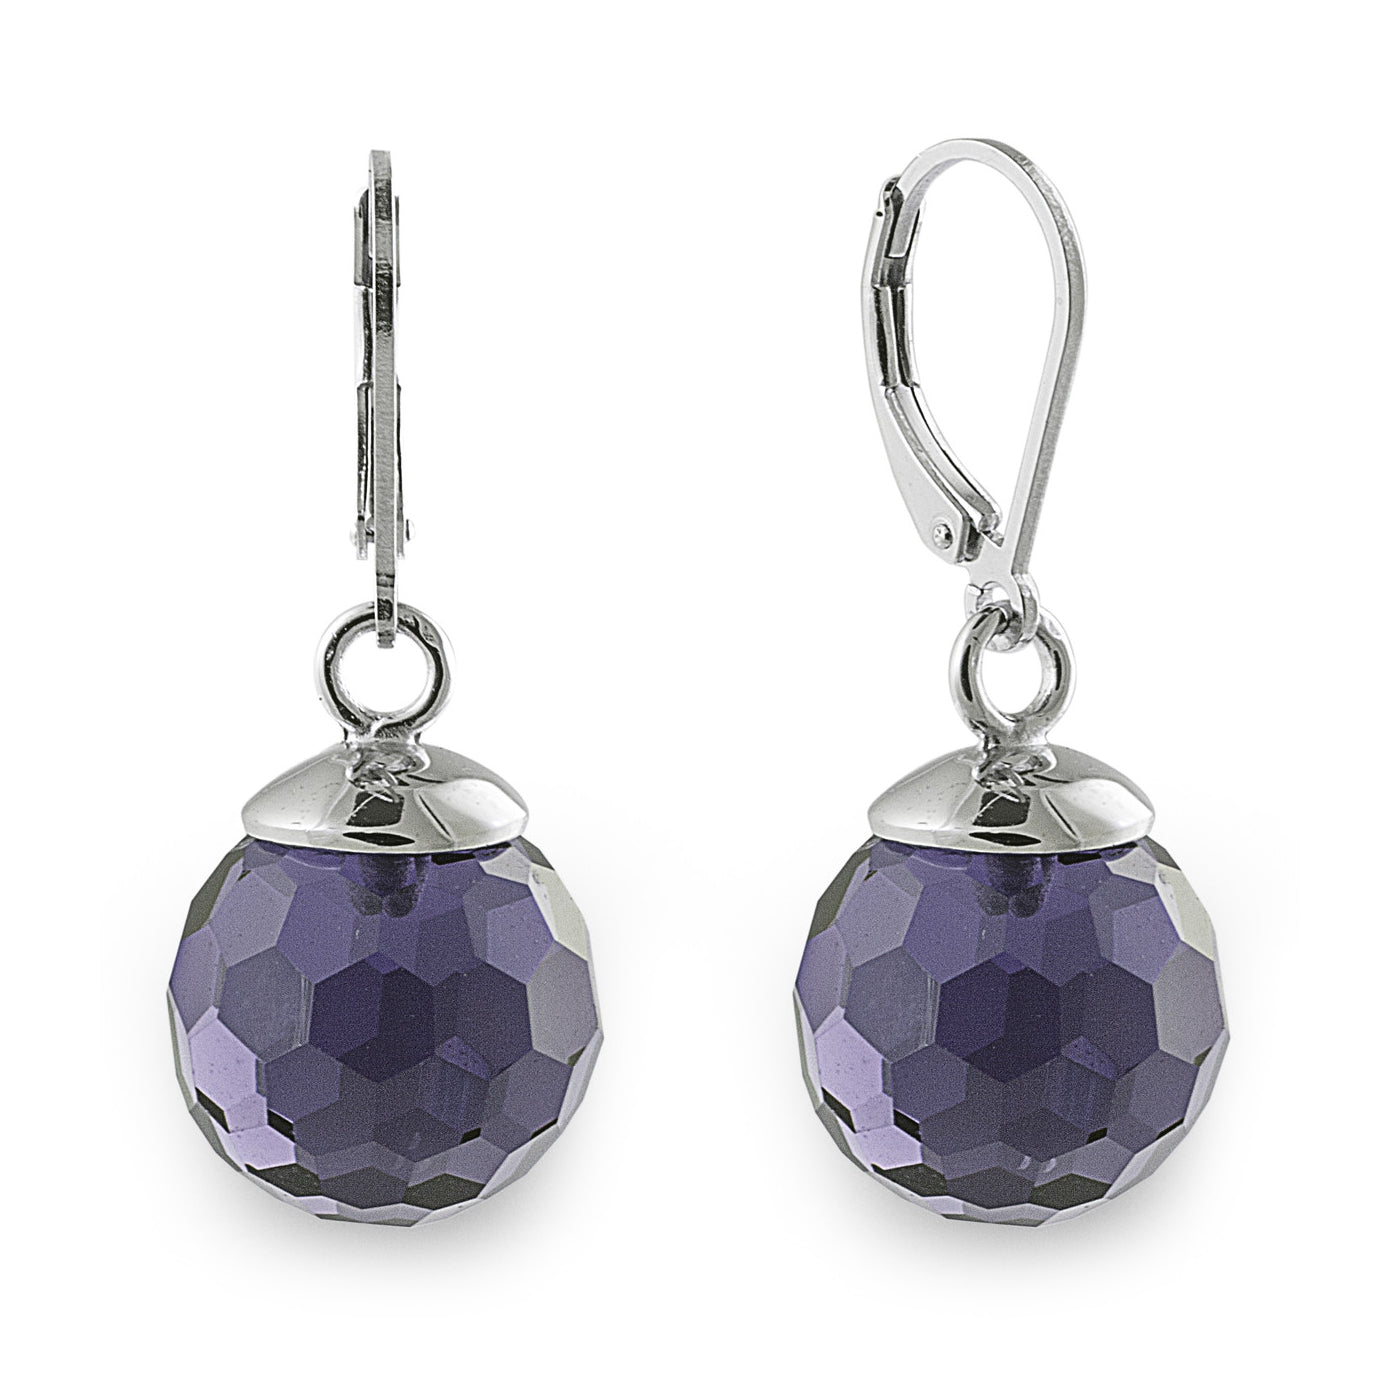 The Lavender Lopez Drop Earrings are made of 925 sterling silver and feature facet-cut purple obsidian with European ear hooks. Simple elegance suitable for everyday wear. More colours and matching rings are available. Jewellery by Bellagio & Co. Worldwide Shipping. Free shipping for orders over $150.00 in Australia.